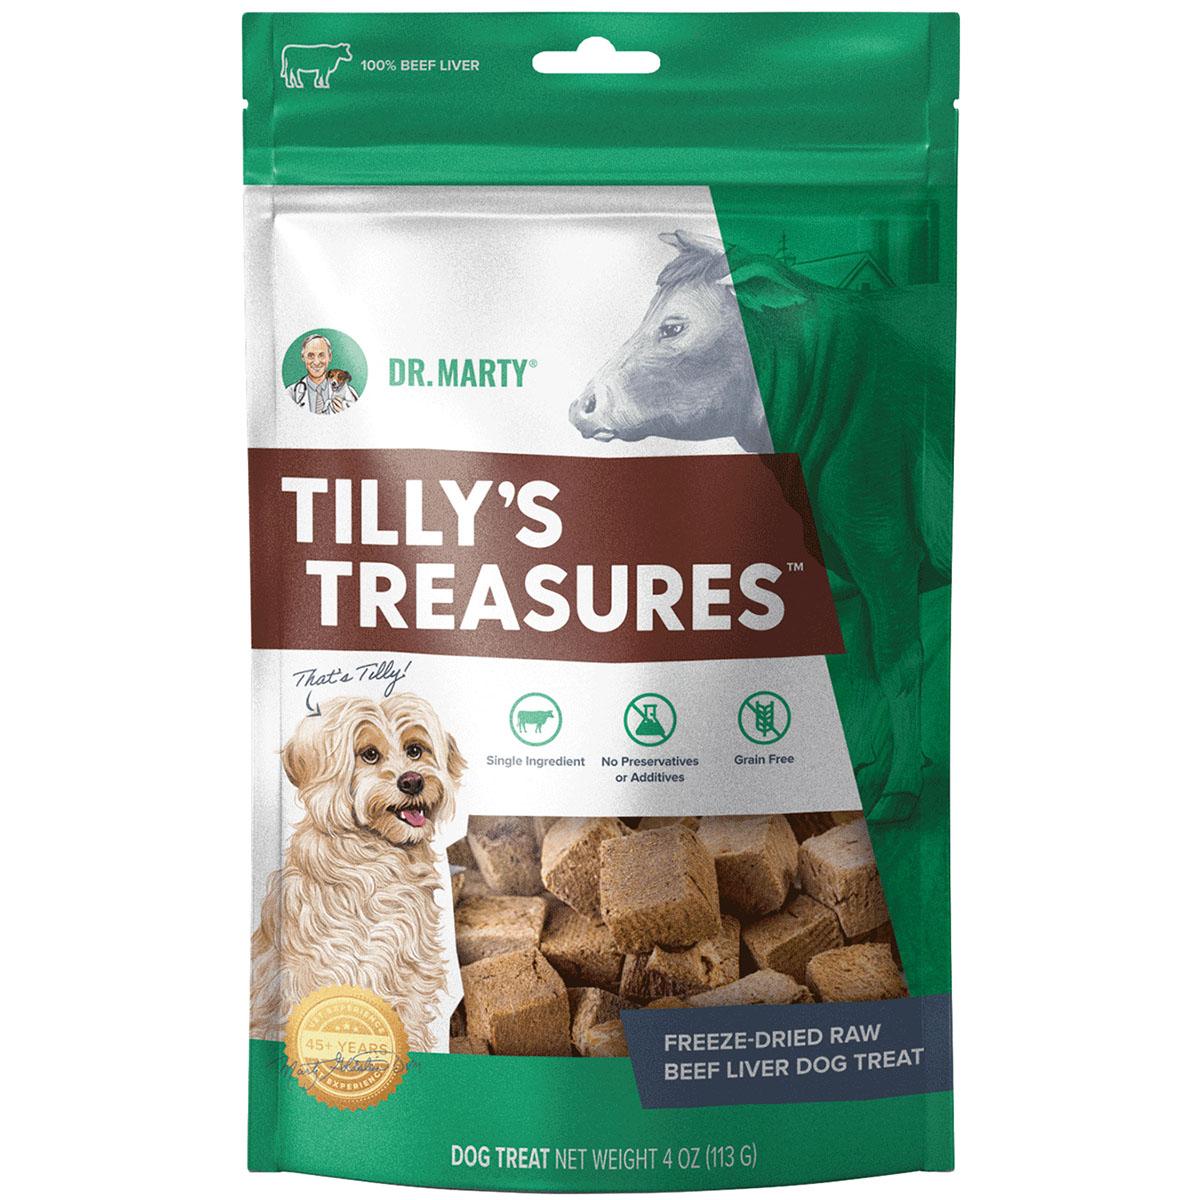 Dr. Marty Tilly's Treasures Freeze-Dried Beef Liver Dog Treats 